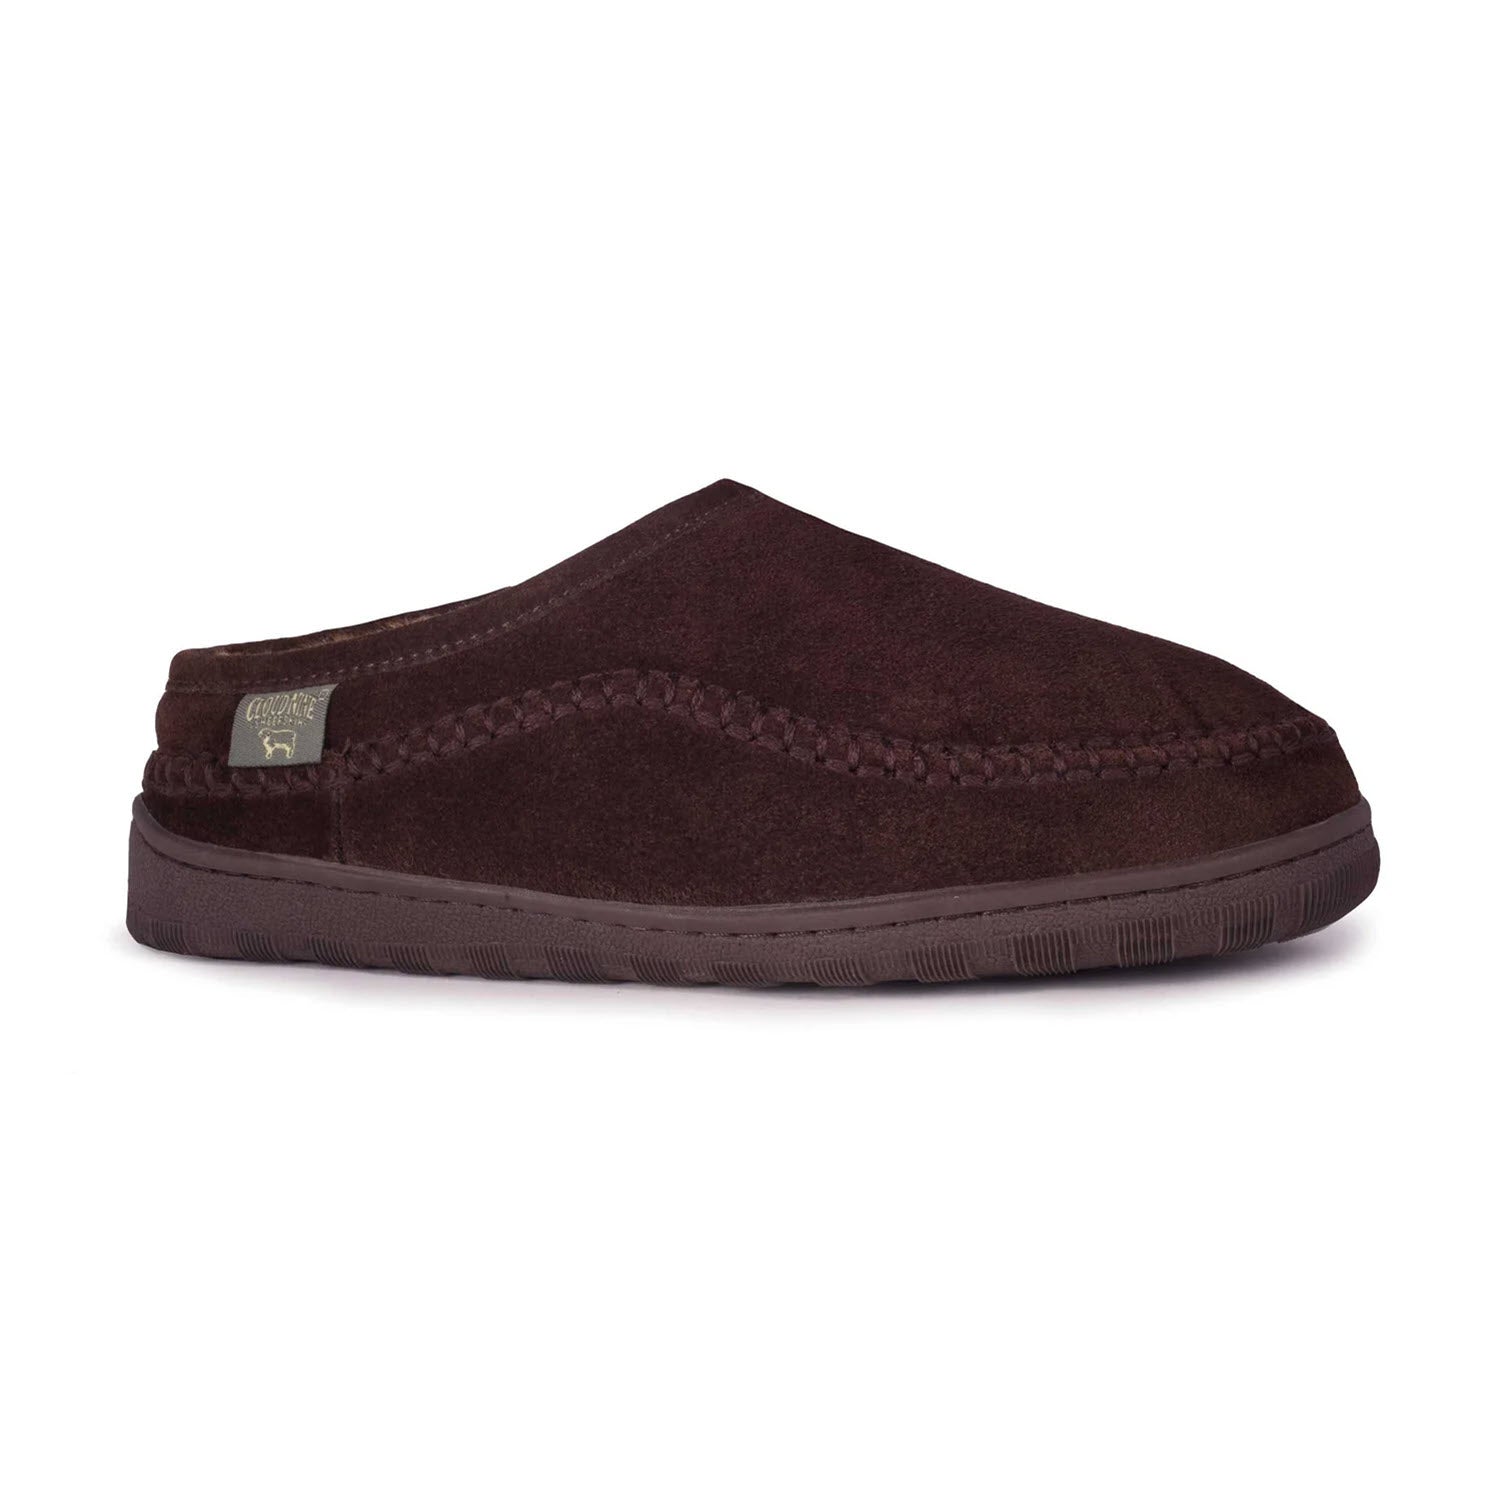 A single Cloud Nine Pacific Slide Chocolate Suede slipper by Deer Stags, designed for foot happiness, a round toe, and a flat rubber sole, isolated on a white background.